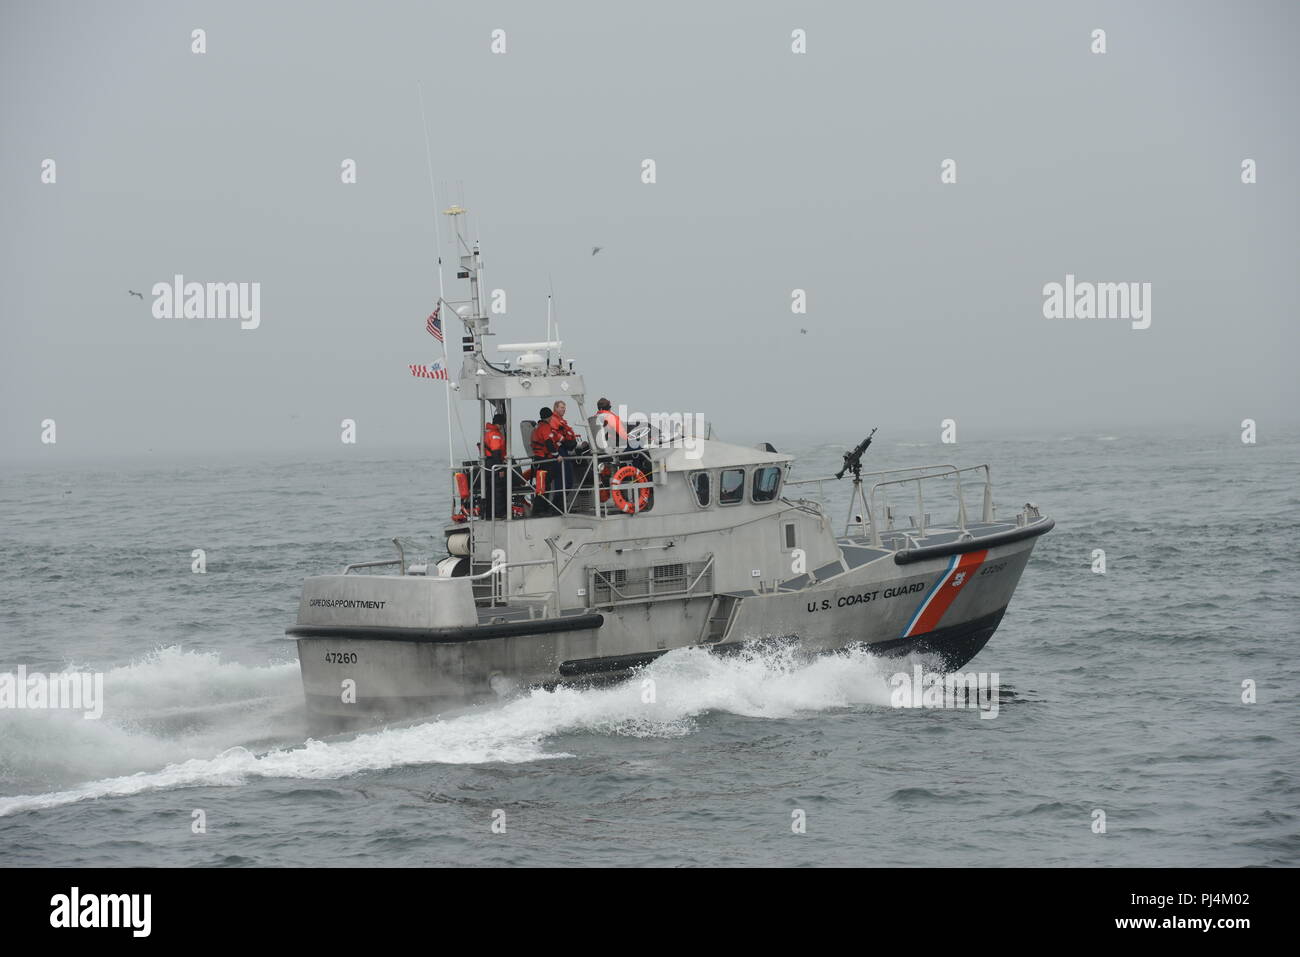 A boat crew aboard a 47-foot Motor Life Boat from Coast Guard Station Cape Disappointment patrols the Pacific Ocean 5 miles west of the Columbia River entrance, near Ilwaco, Wash., Aug. 29, 2018.    The crew was scheduled to do a live-fire training with a mounted M-240 weapons system, but the training was cancelled due to low visibility.    U.S. Coast Guard photo by Petty Officer 1st Class Levi Read. Stock Photo